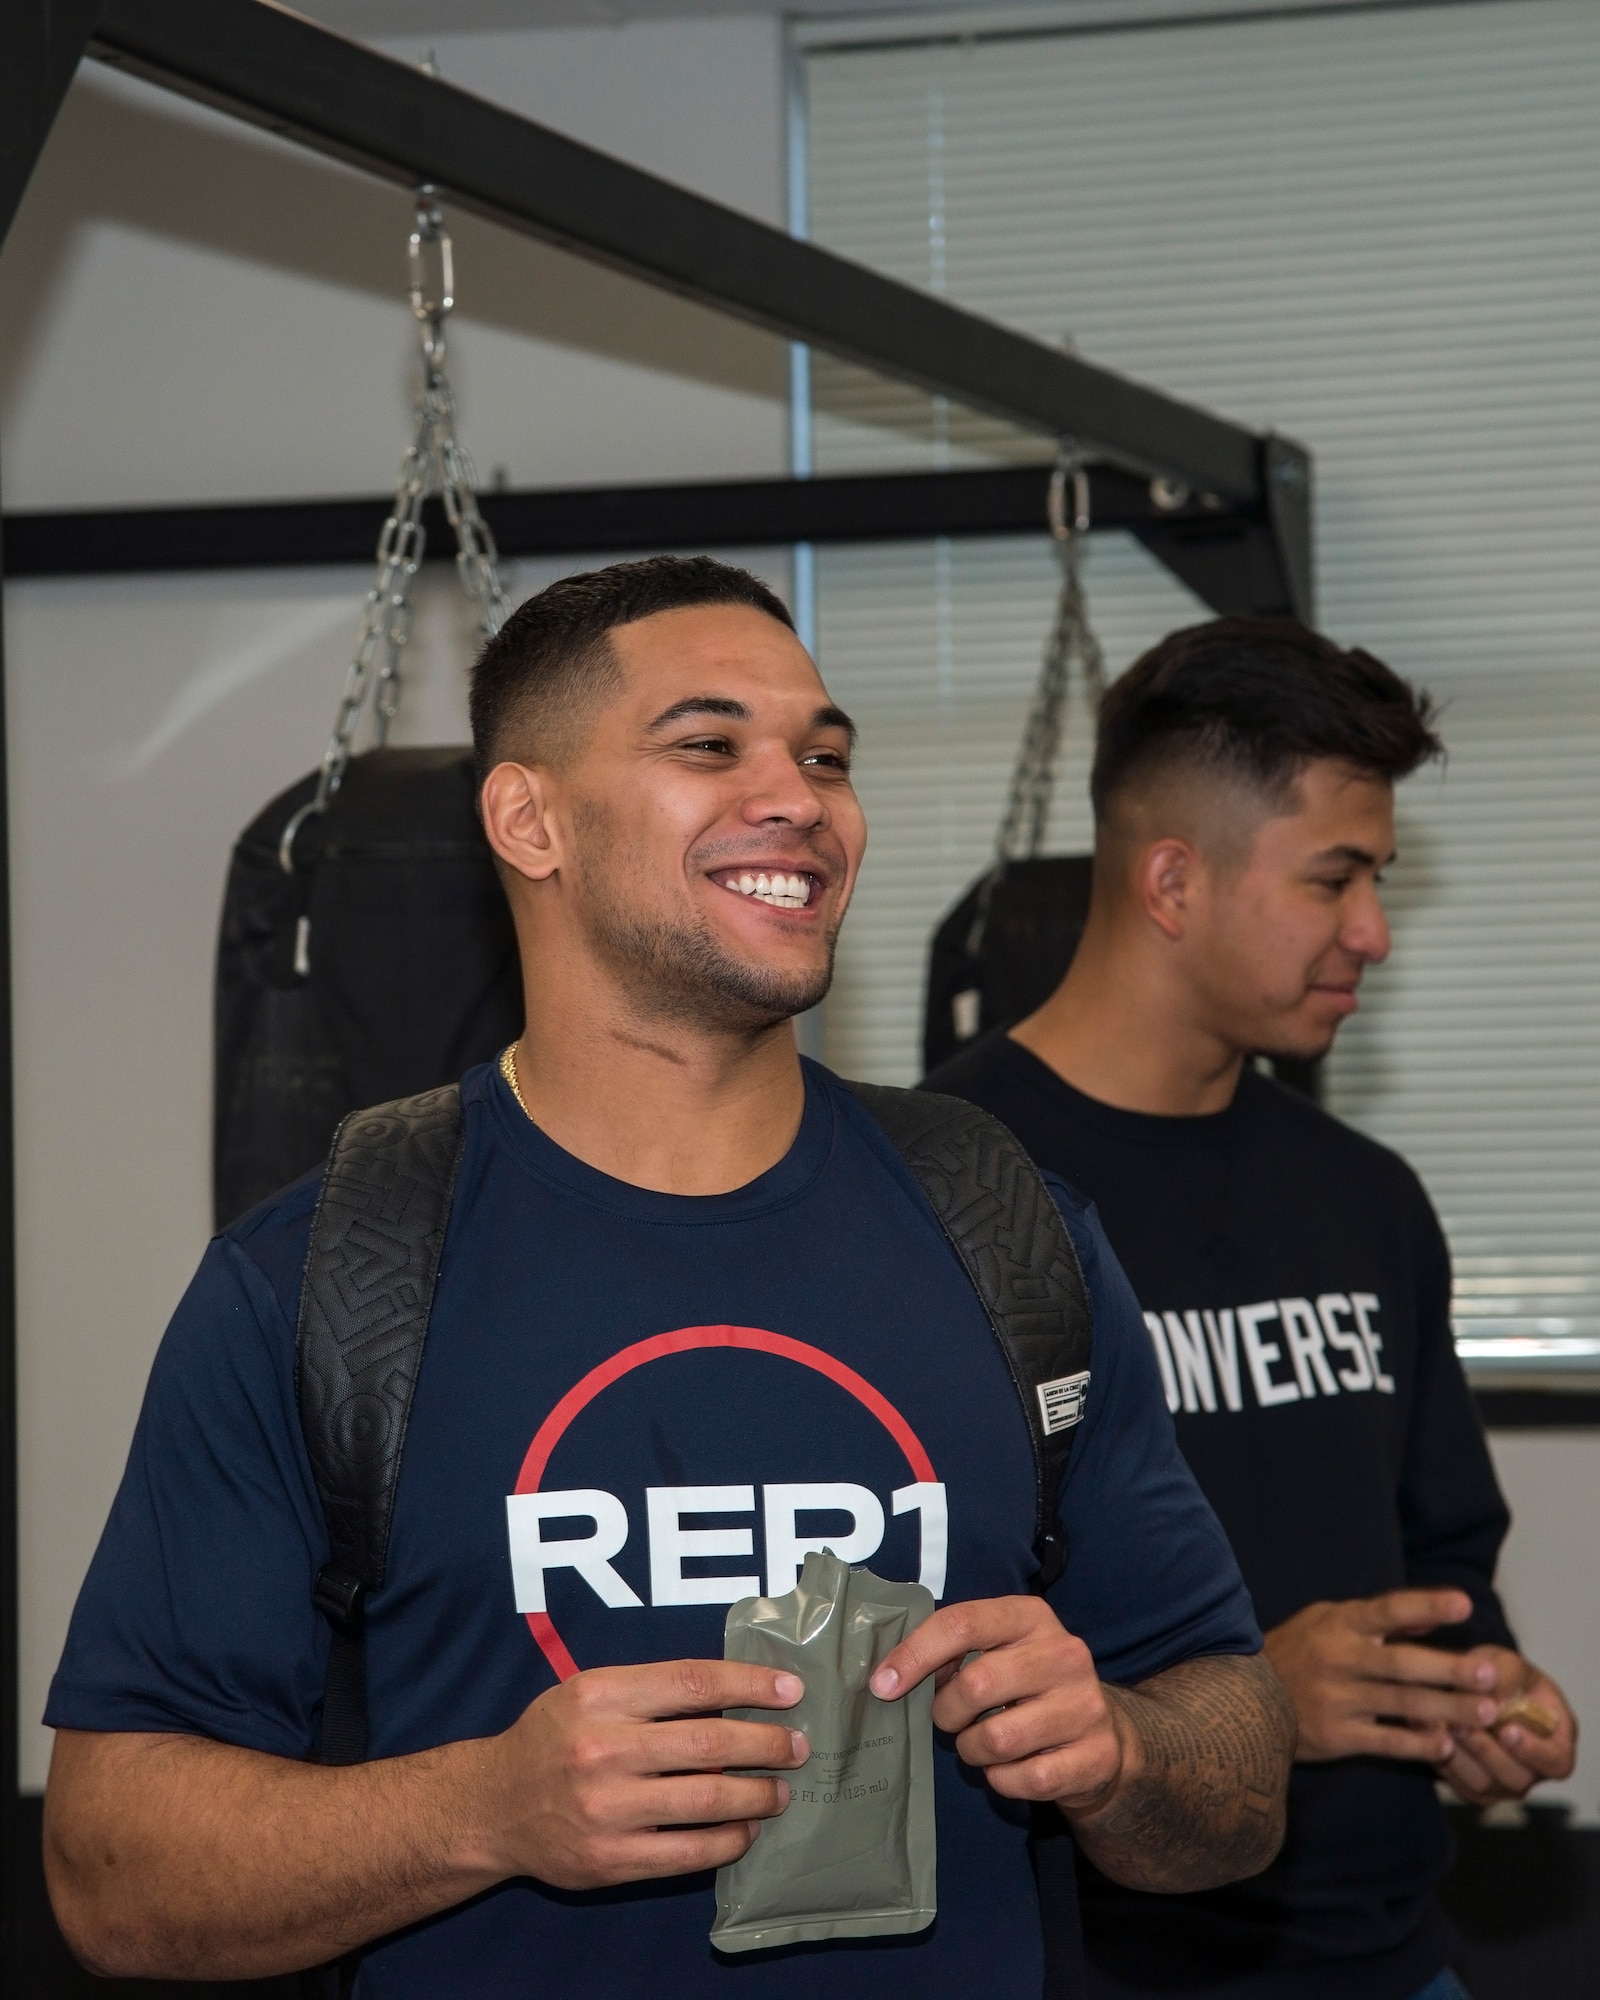 Pittsburgh Steelers running back James Conner attends a tour of the Survival, Evasion, Resistance and Escape (SERE) facility at MacDill Air Force Base, Fla., Jan. 28, 2020.